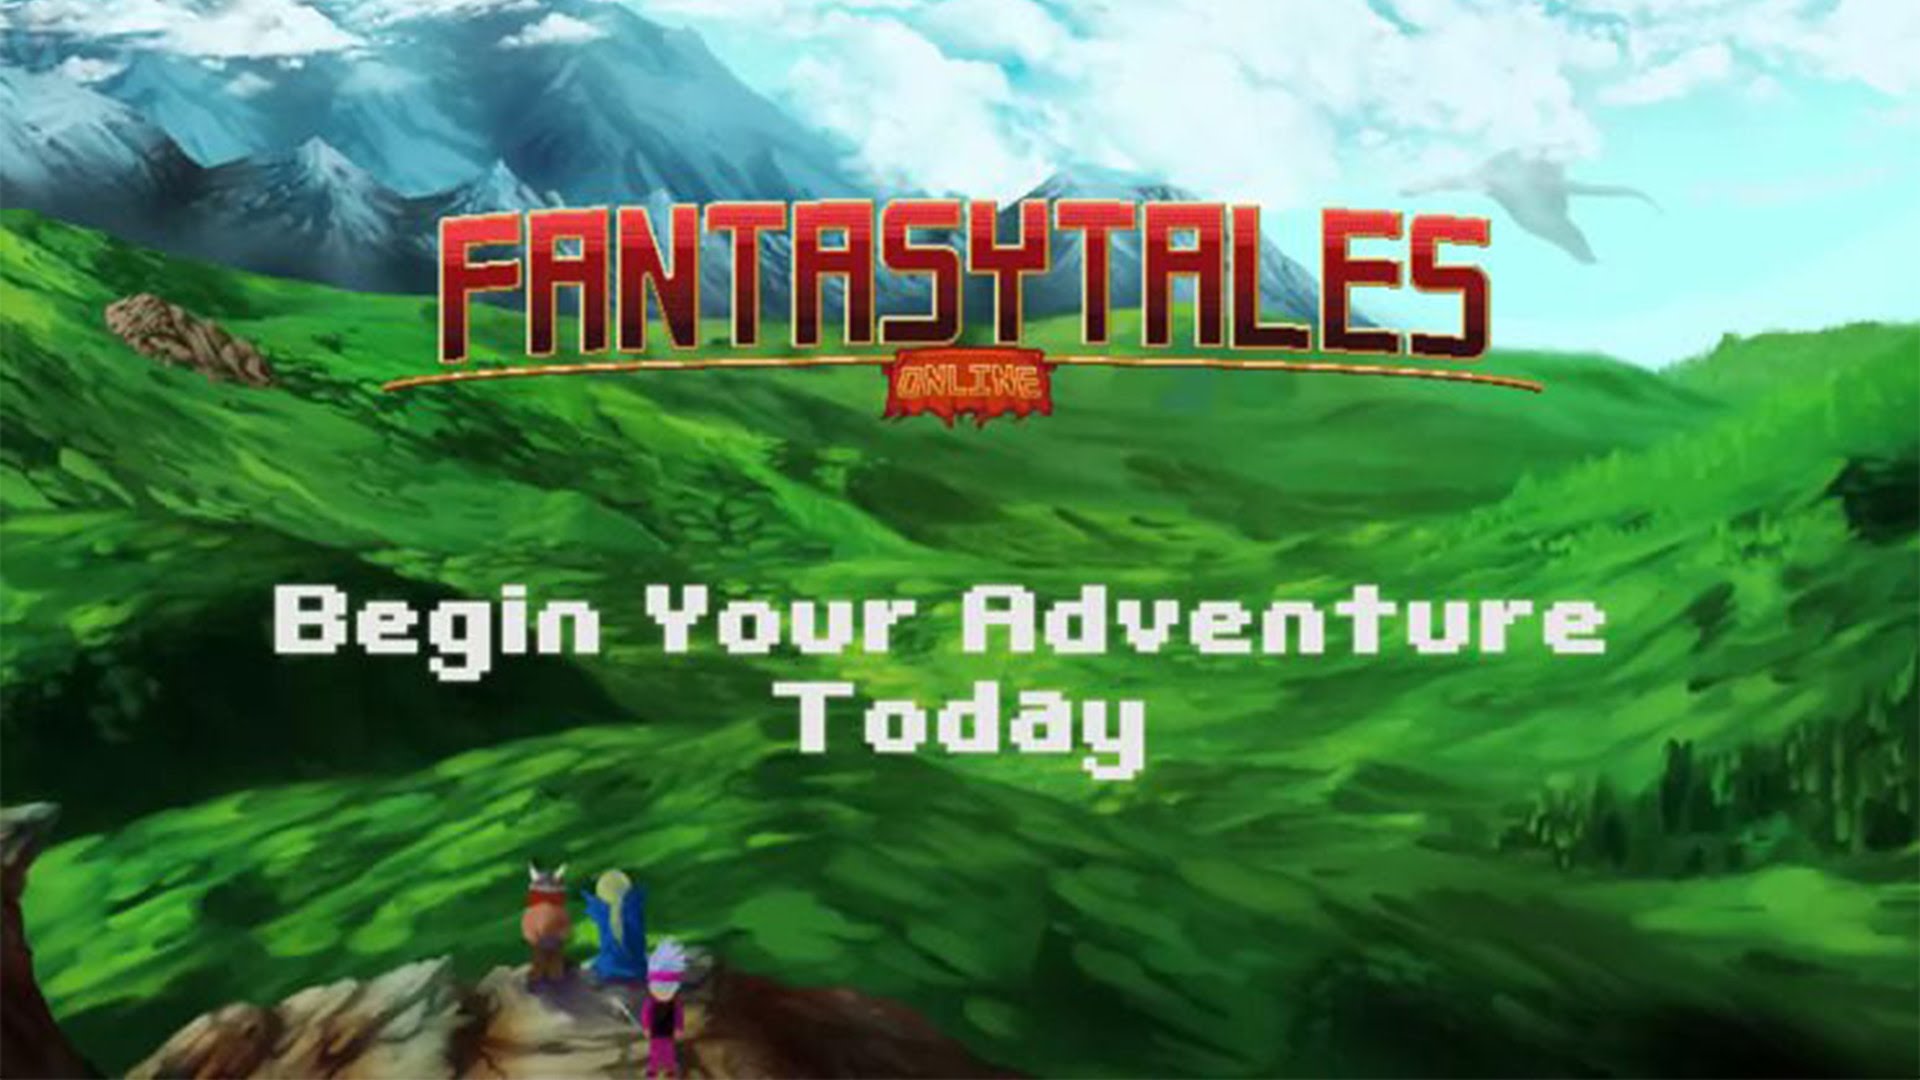 Fantasy Tales Online Game Review